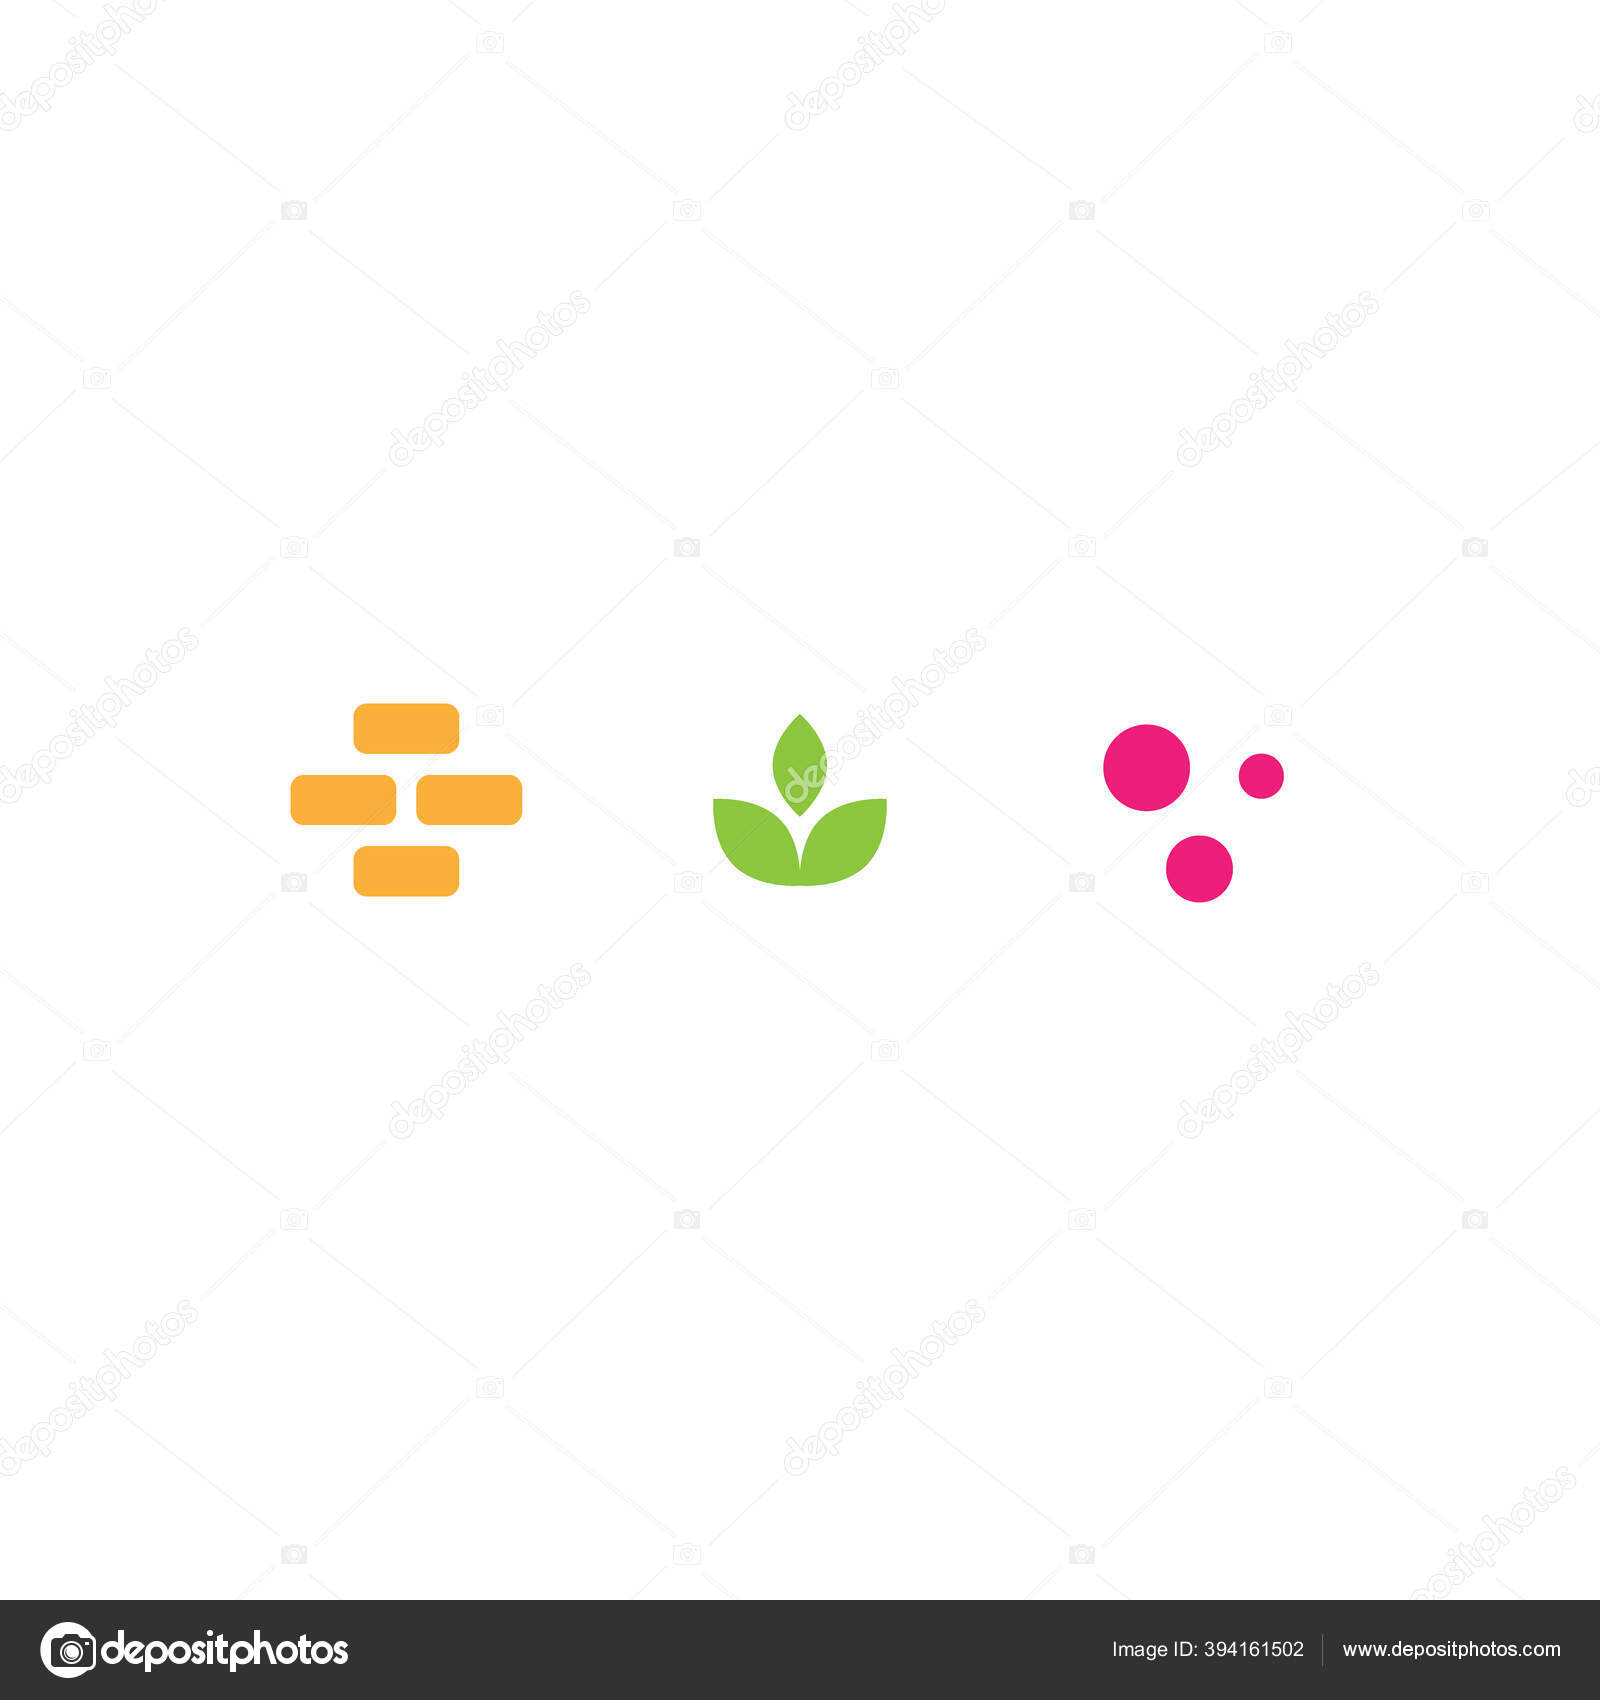 https://st4.depositphotos.com/12837522/39416/v/1600/depositphotos_394161502-stock-illustration-protein-carbohydrates-fat-simple-icons.jpg